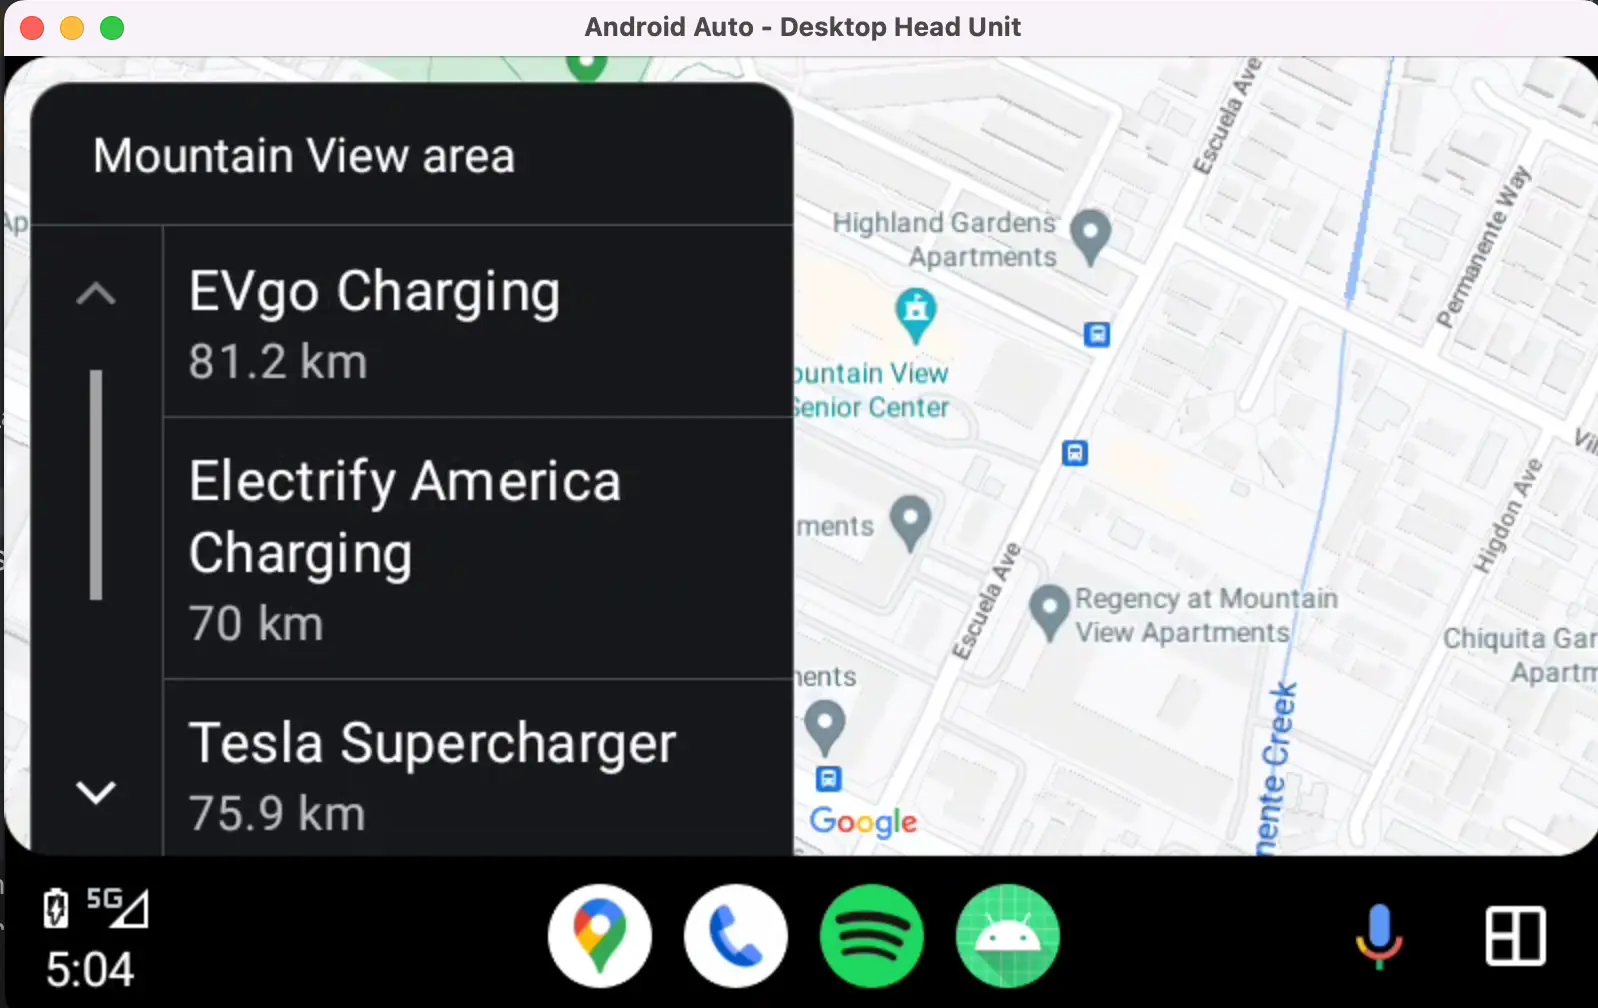 Charging station app showing map and station list